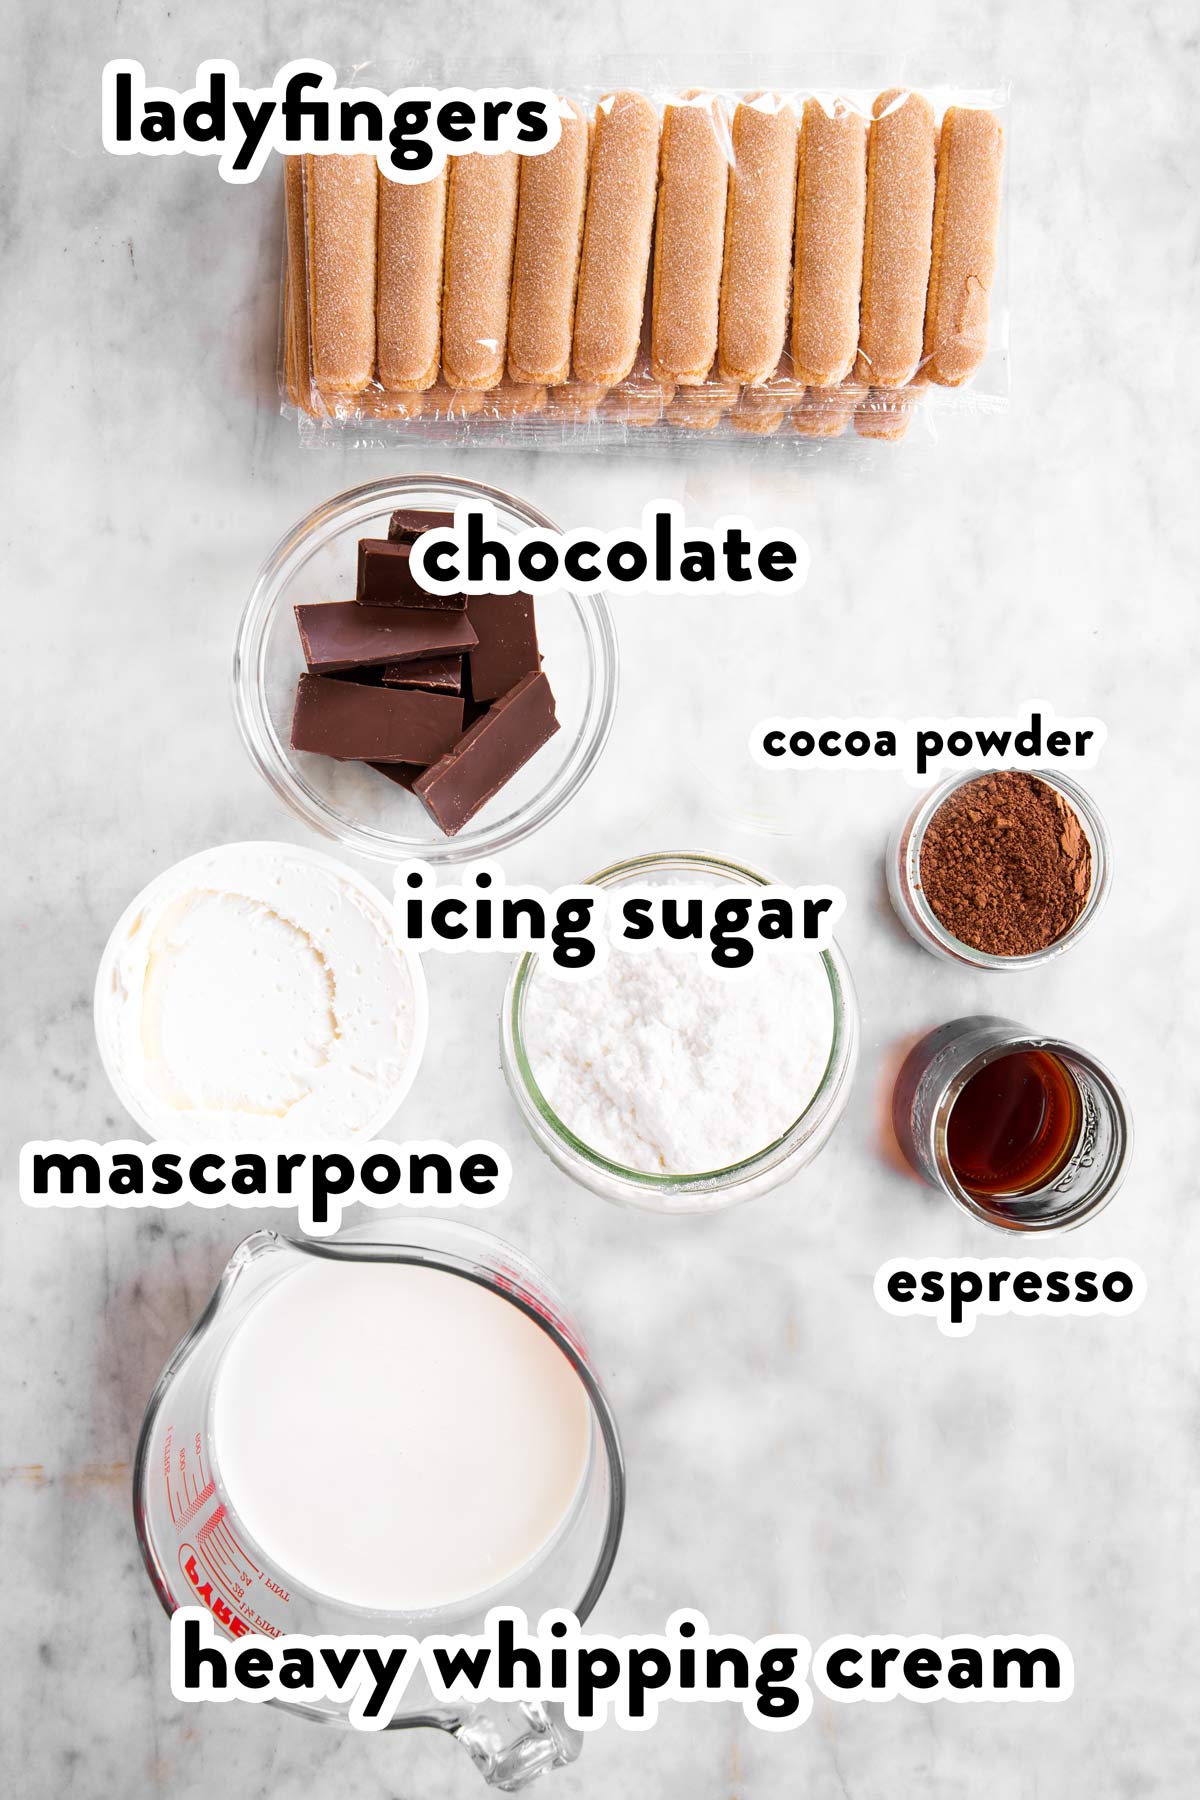 ingredients for tiramisu chocolate mousse with text labels